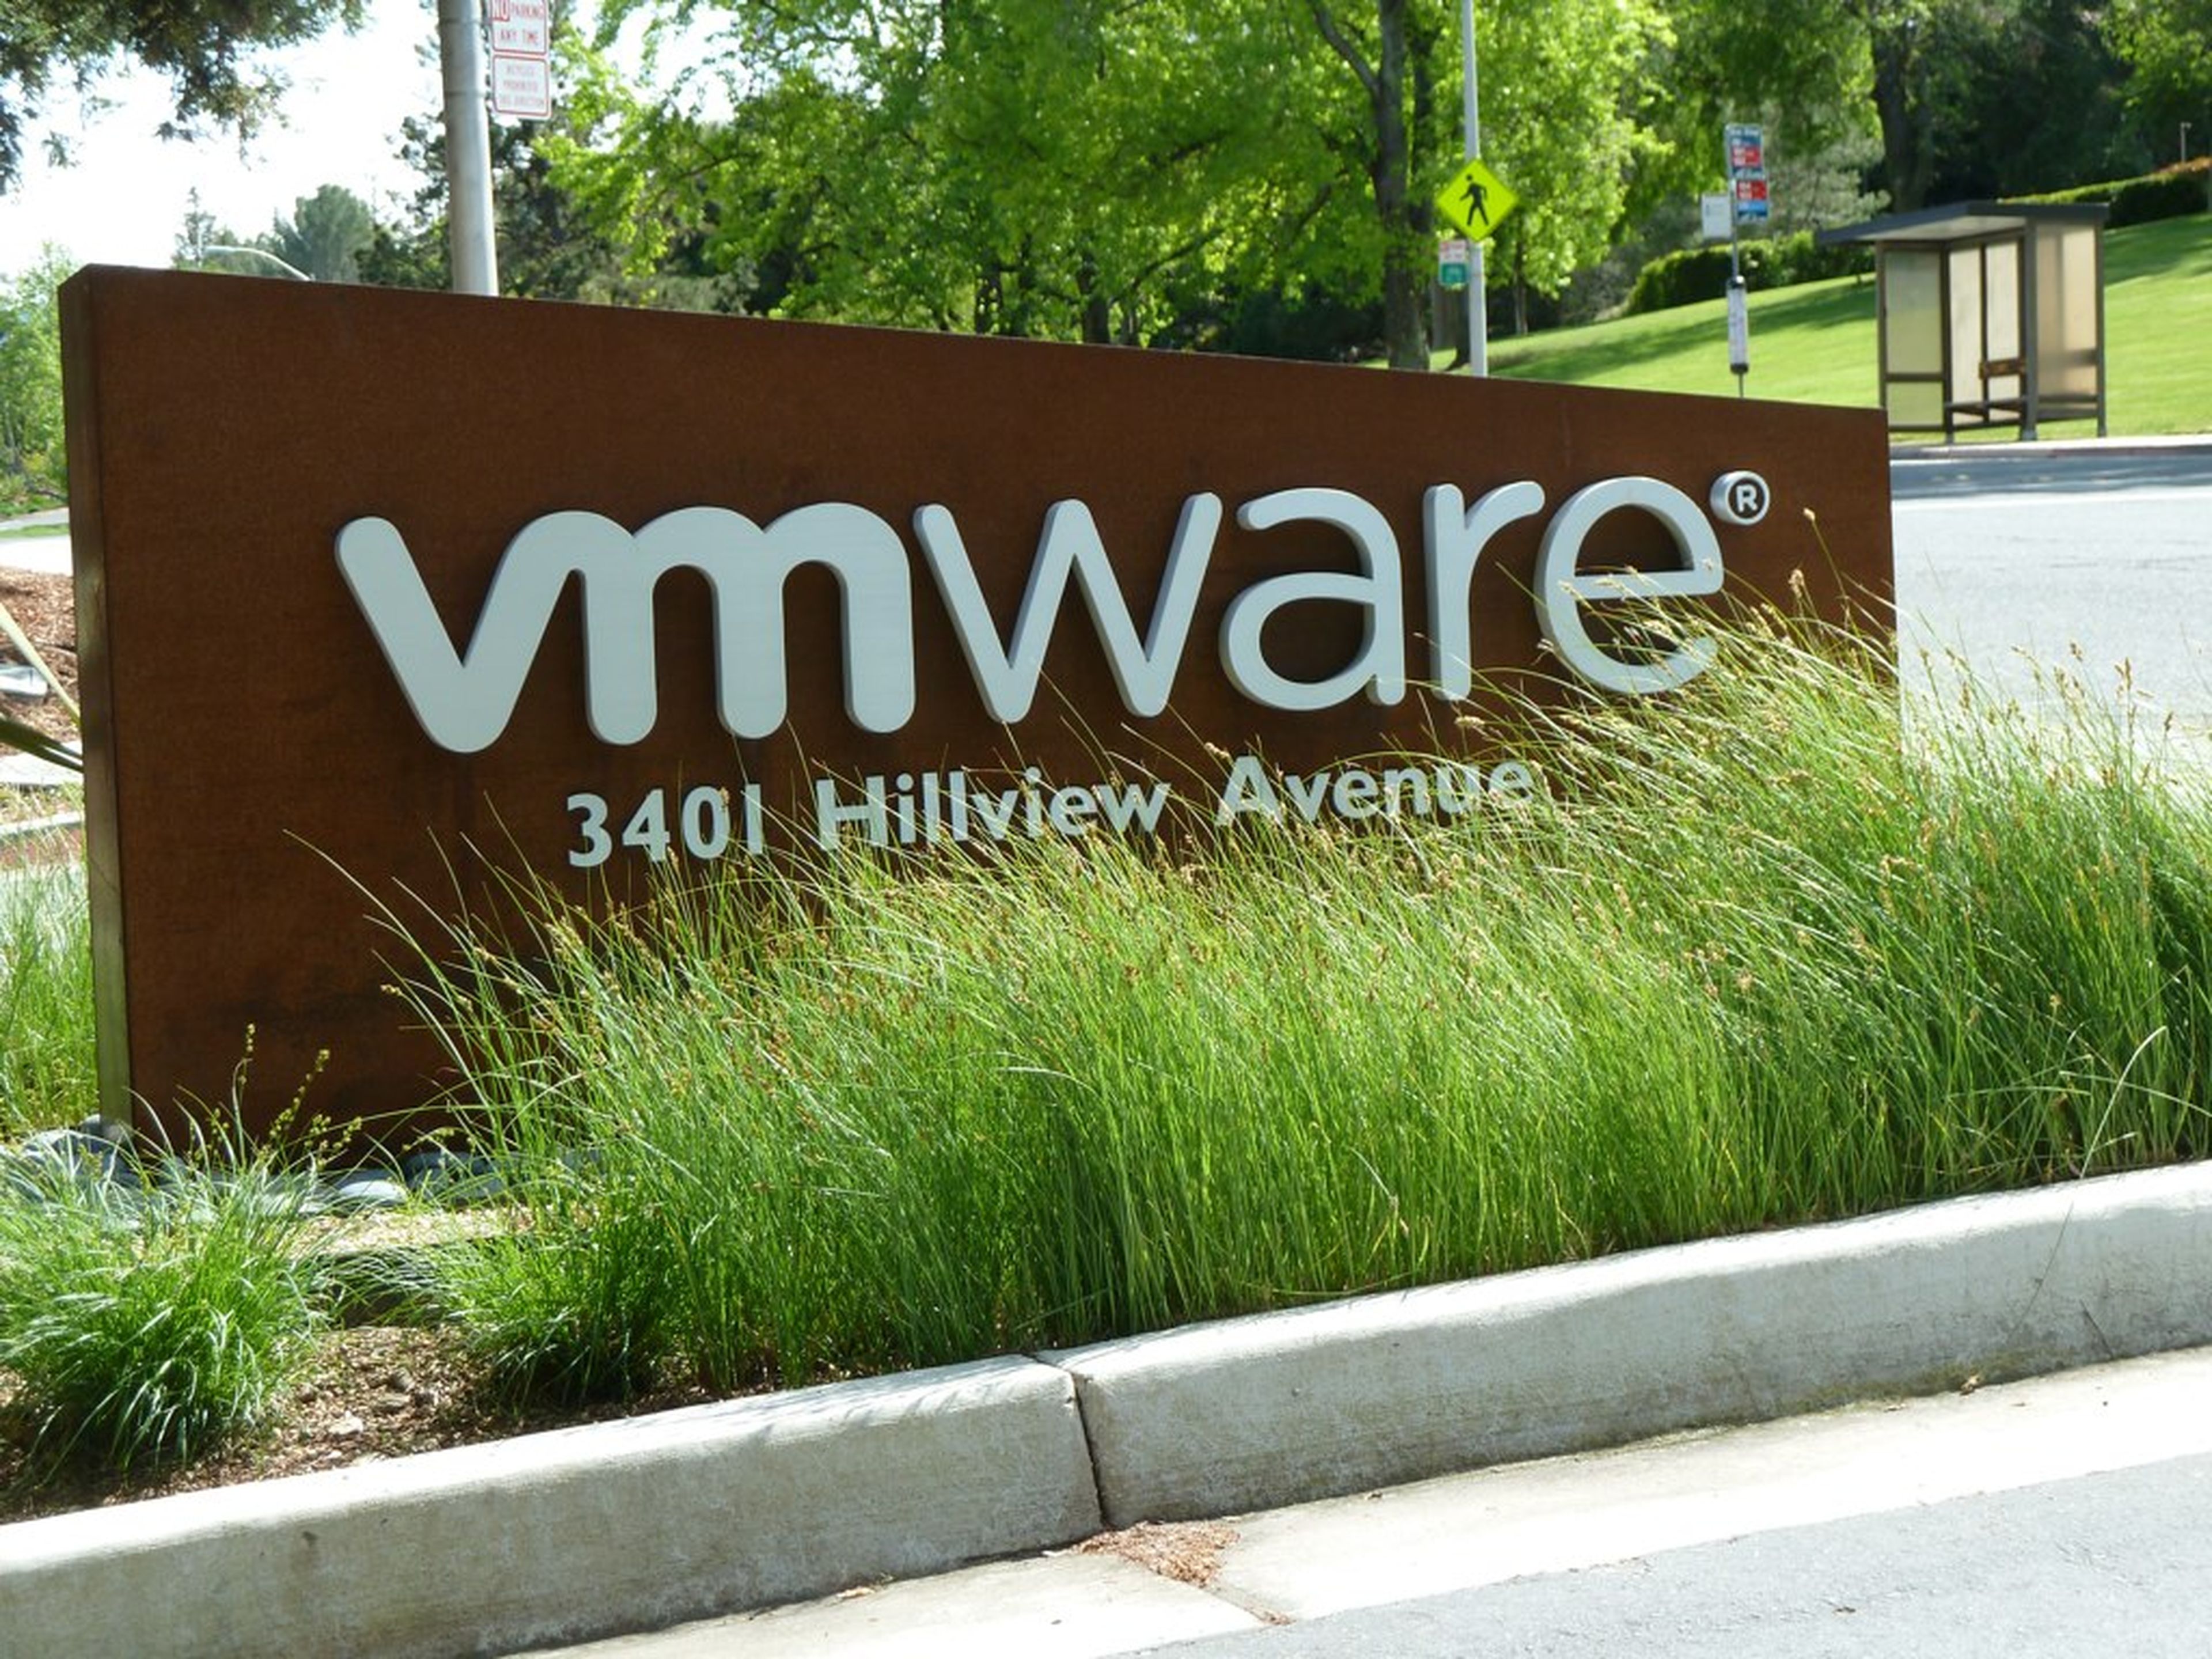 (&#8220;VMware headquarters&#8221; by Ferran Rodenas is licensed under CC BY-NC-SA 2.0)